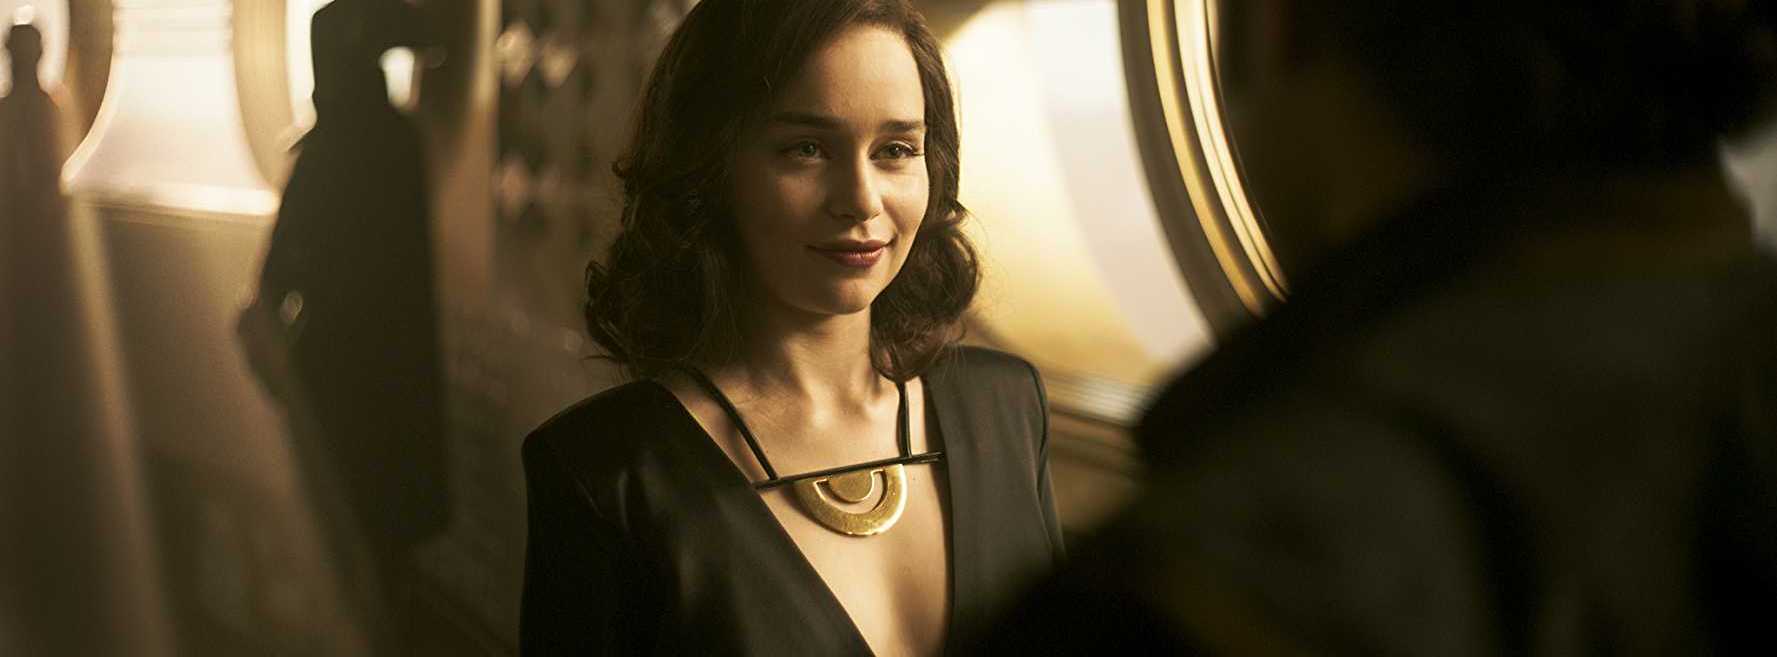 Emilia Clarke Hot Cleavage in Solo: A Star Wars Story